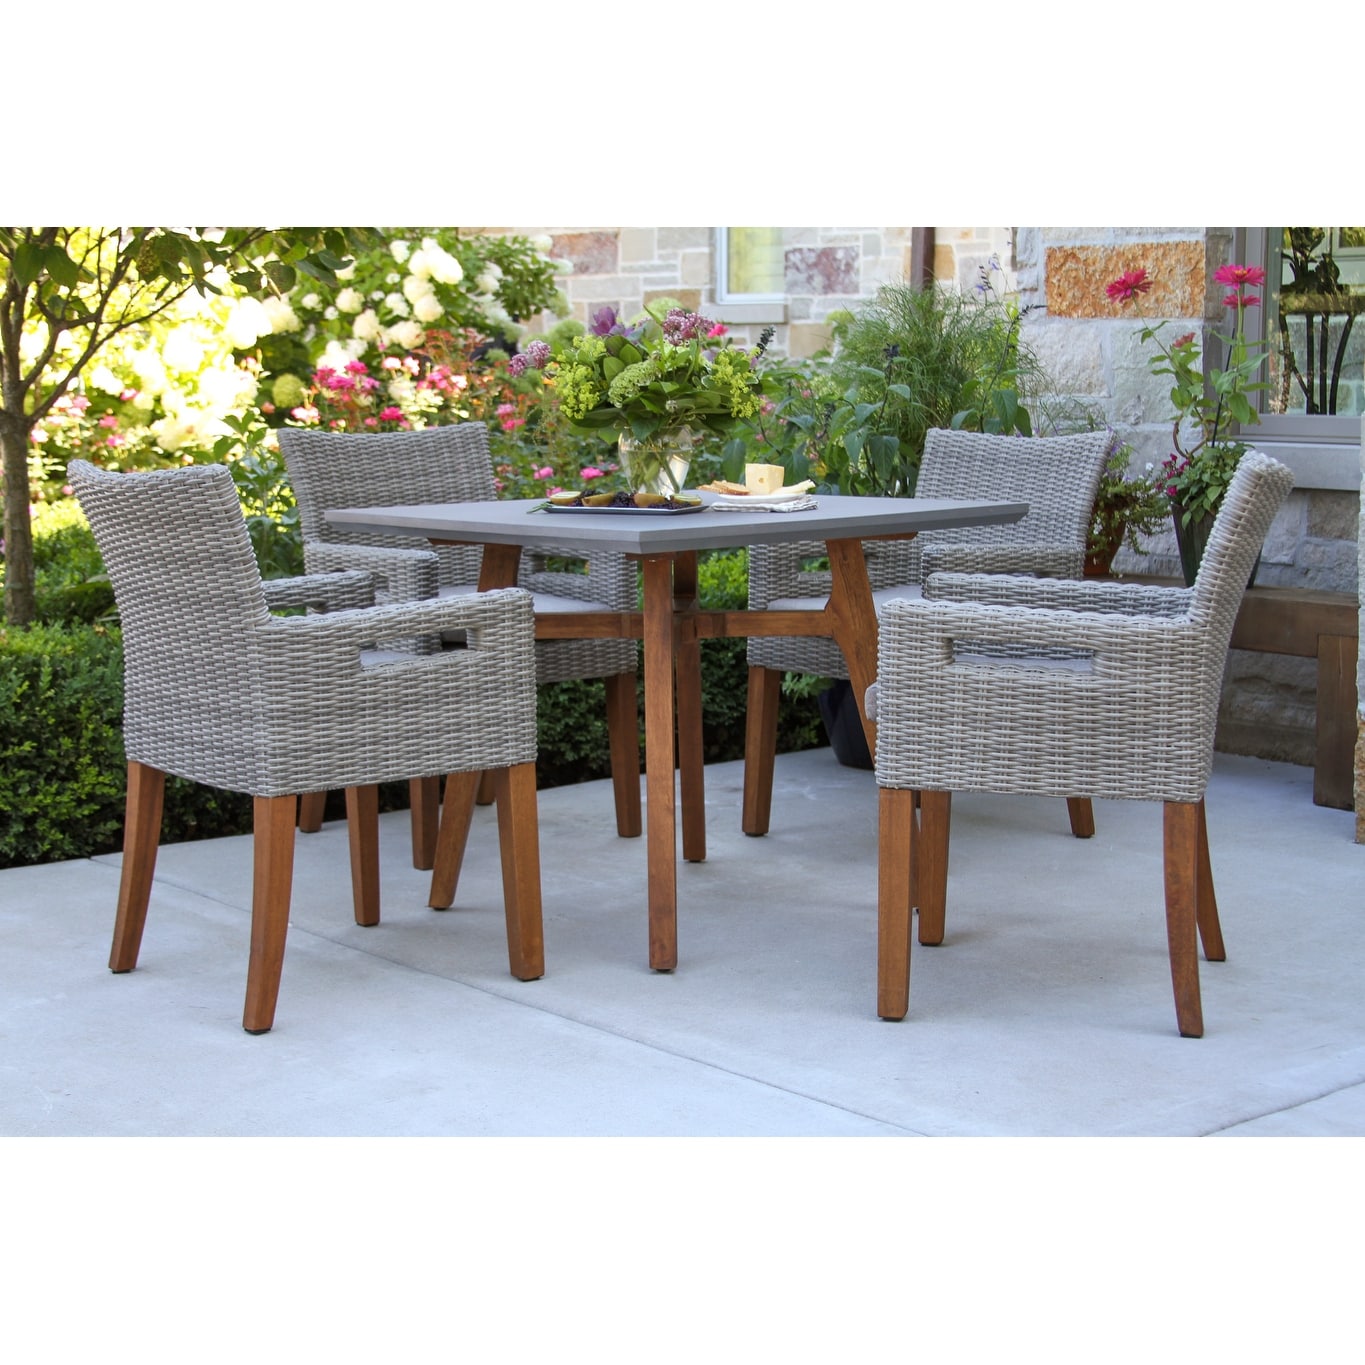 Nadine 5 Pc. Eucalyptus 36 Dining Set With Wicker Chairs